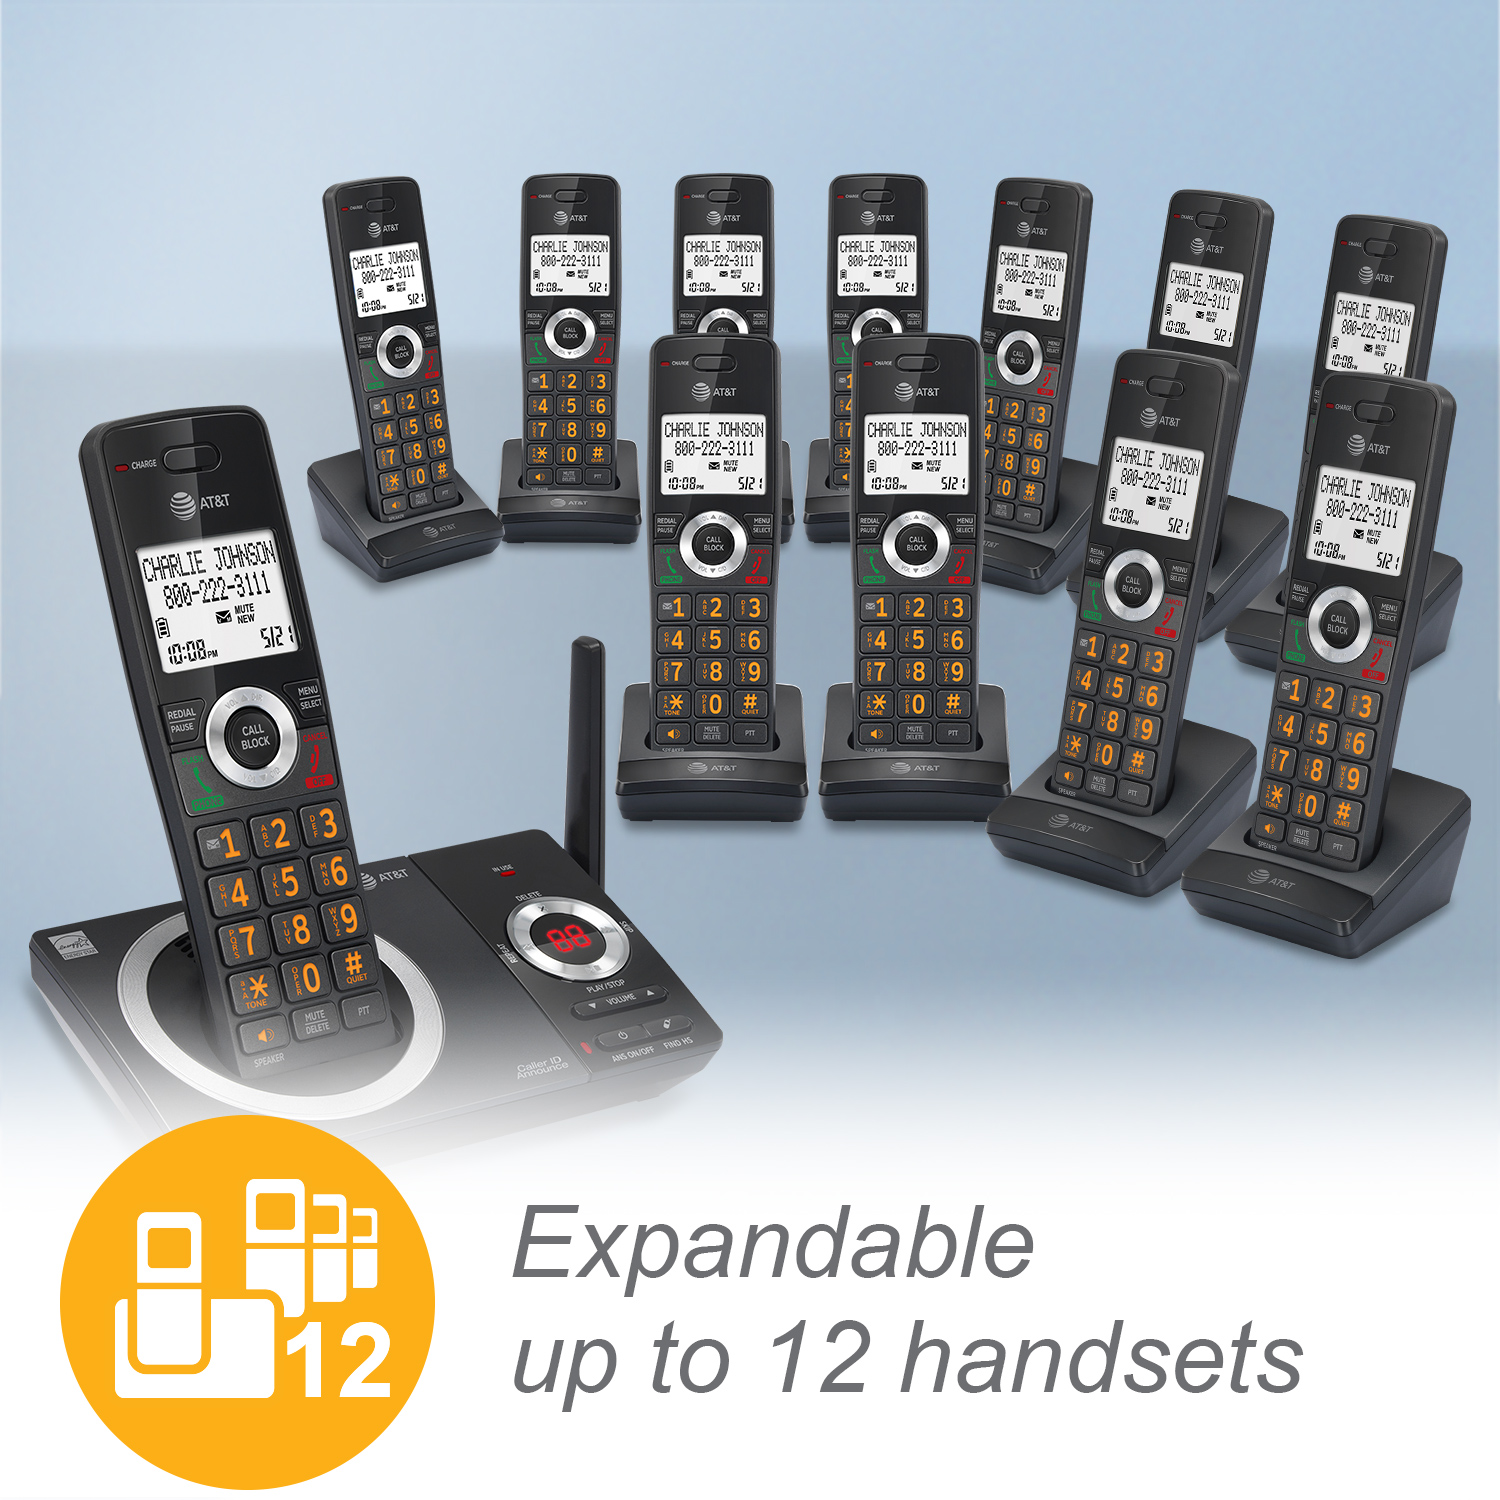 3-Handset Expandable Cordless Phone with Unsurpassed Range, Smart Call Blocker and Answering System - view 6